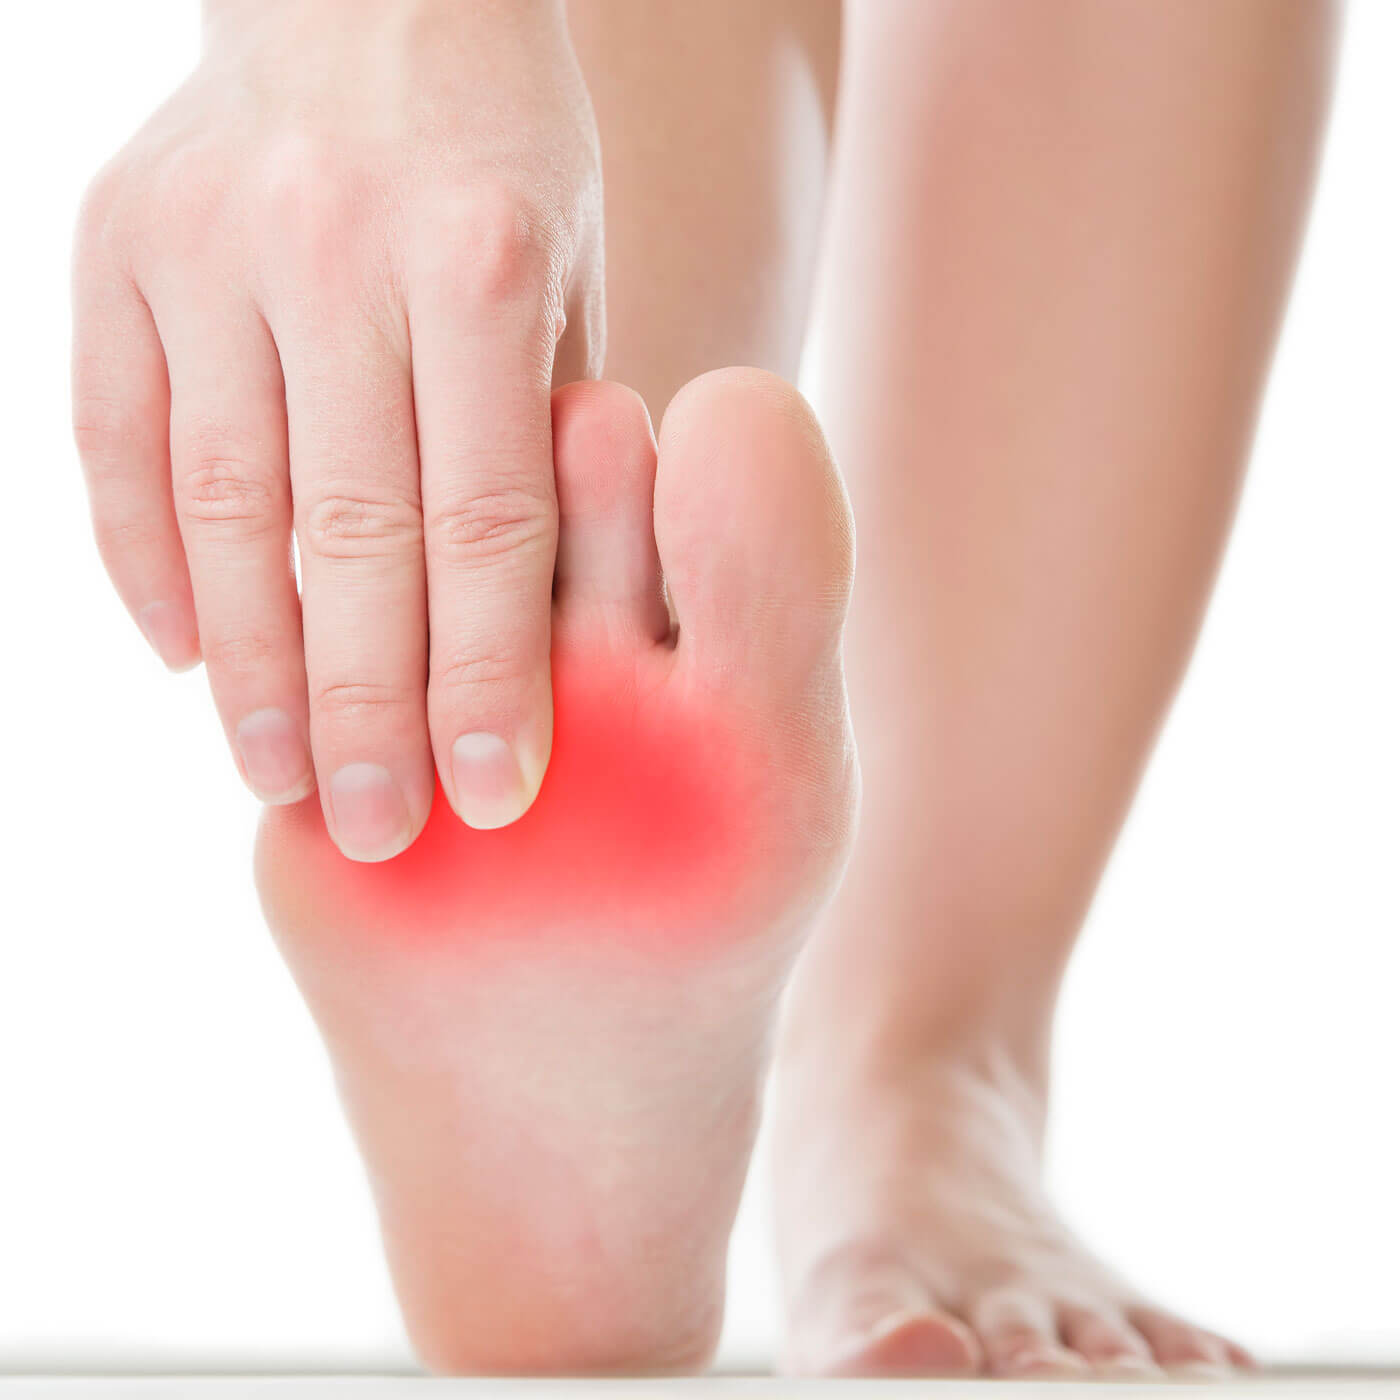 Essential Chiropractic and Healthcare Clinic - Chiropractor Podiatry Services Sore Feet Dry Needling